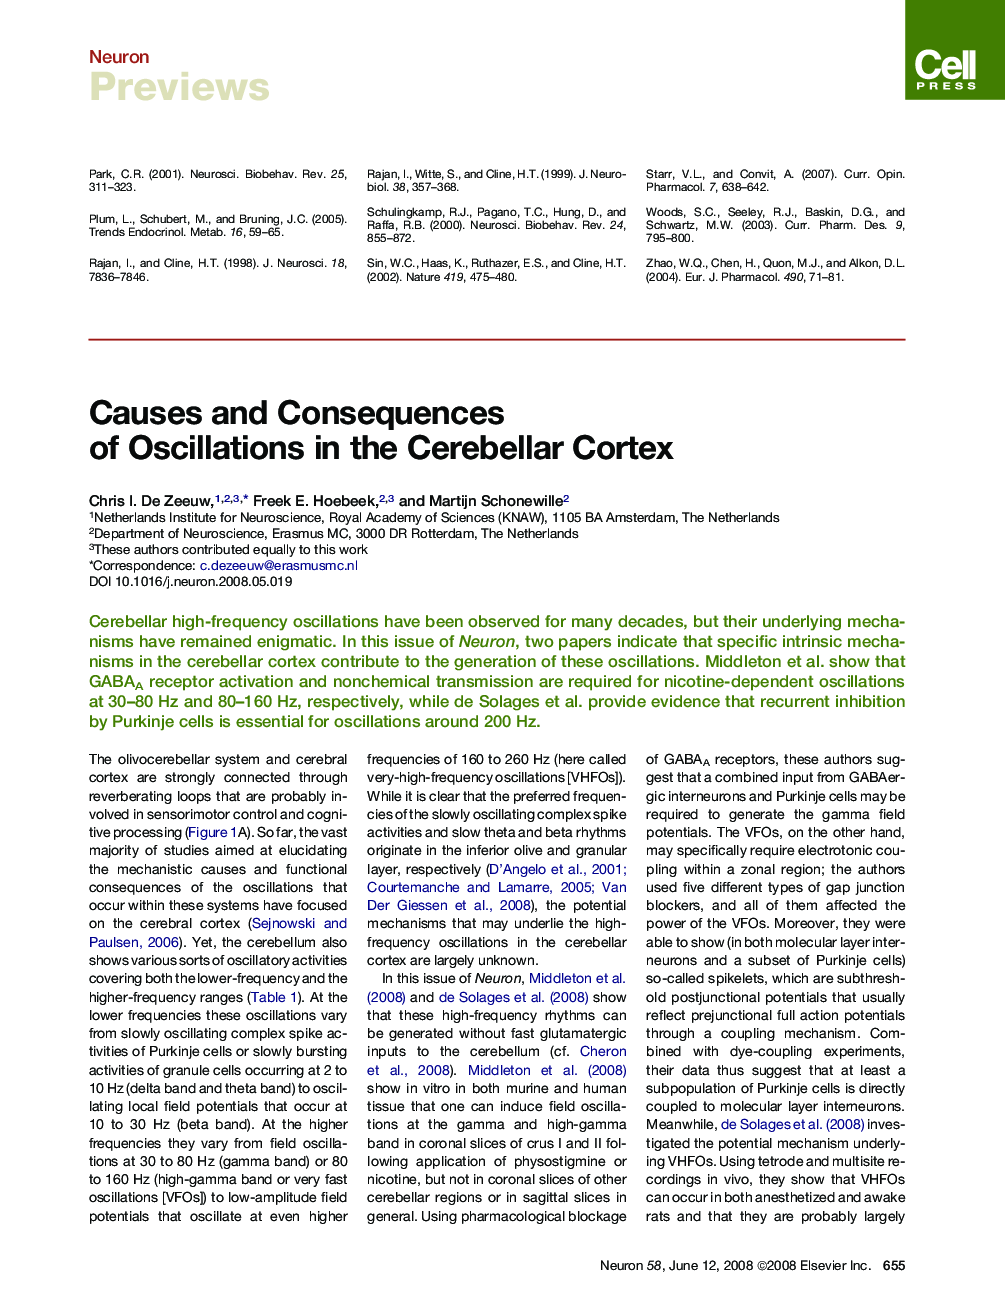 Causes and Consequences of Oscillations in the Cerebellar Cortex